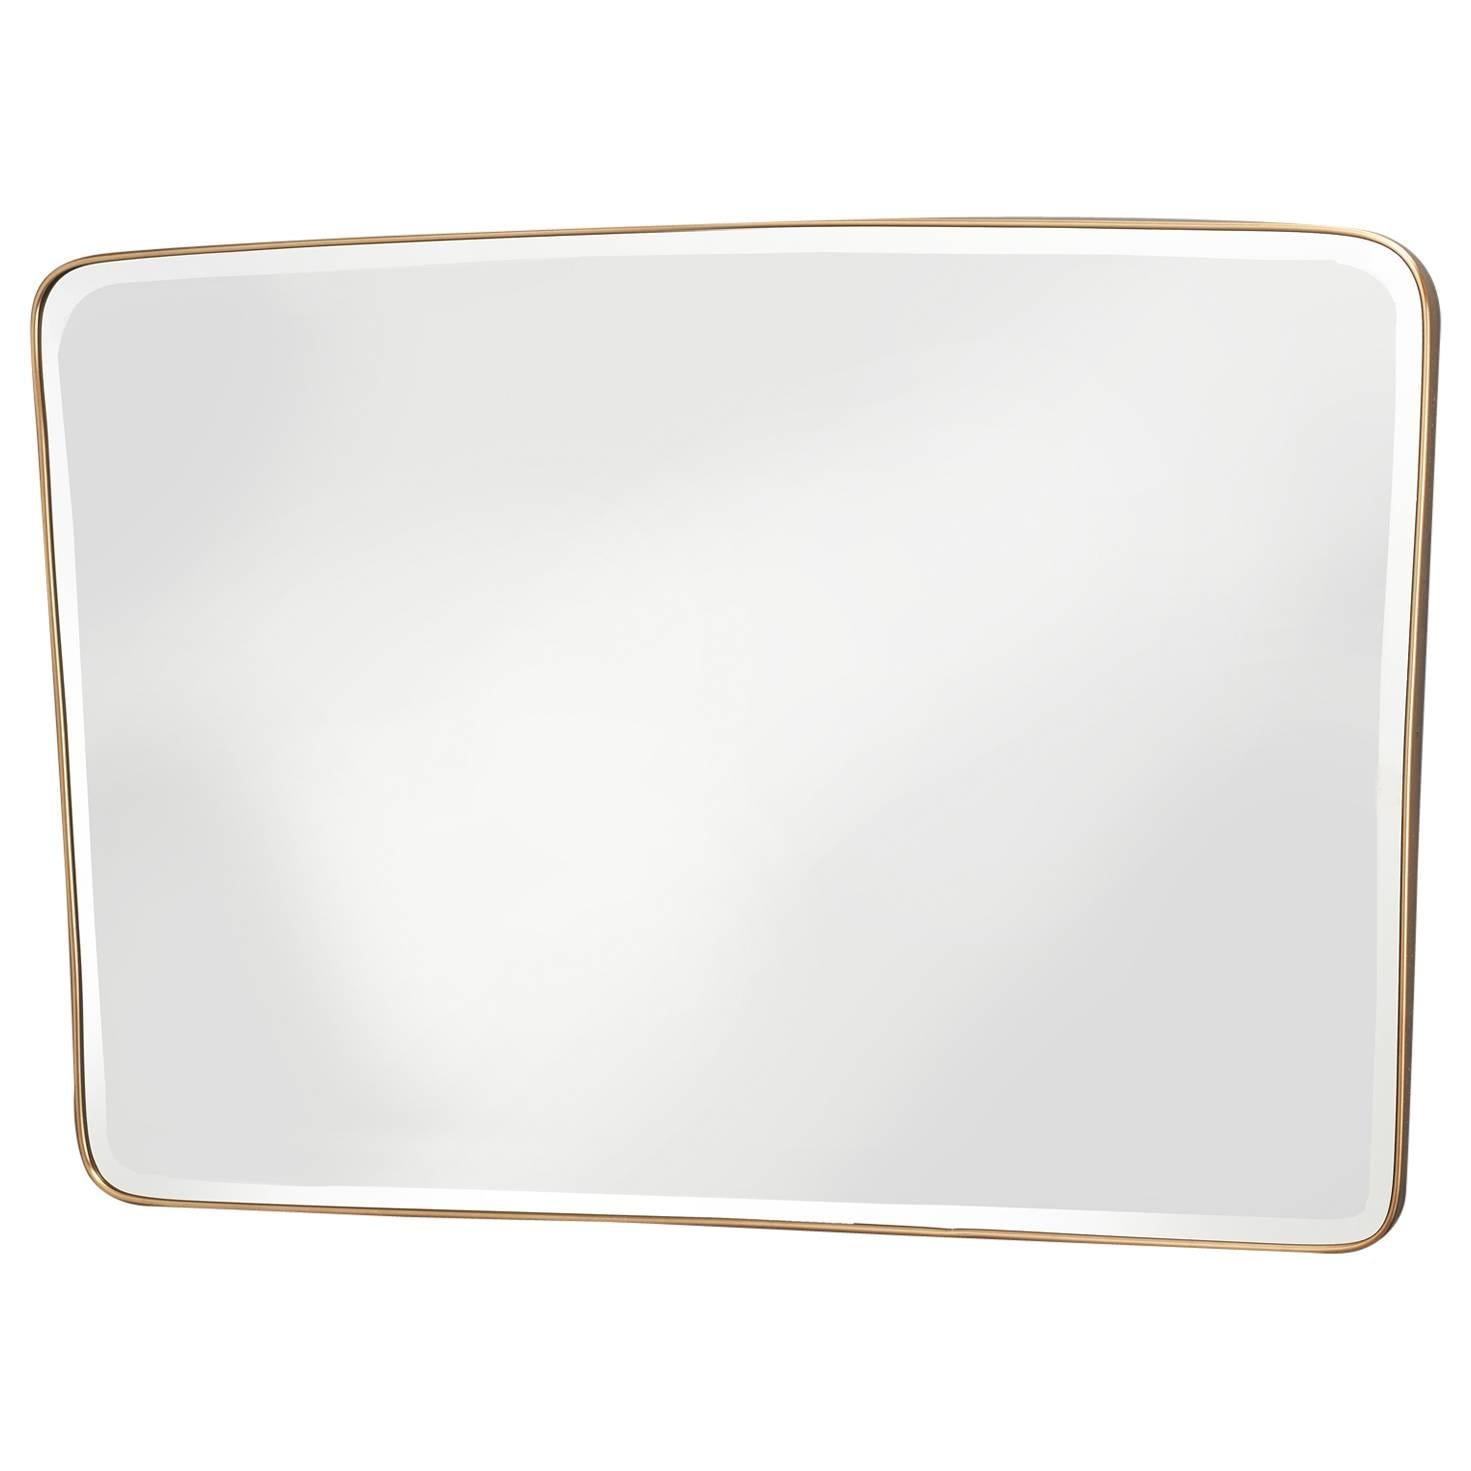 Large Tapered and Shaped Horizontal Brass Mirror, Italy , 1950s